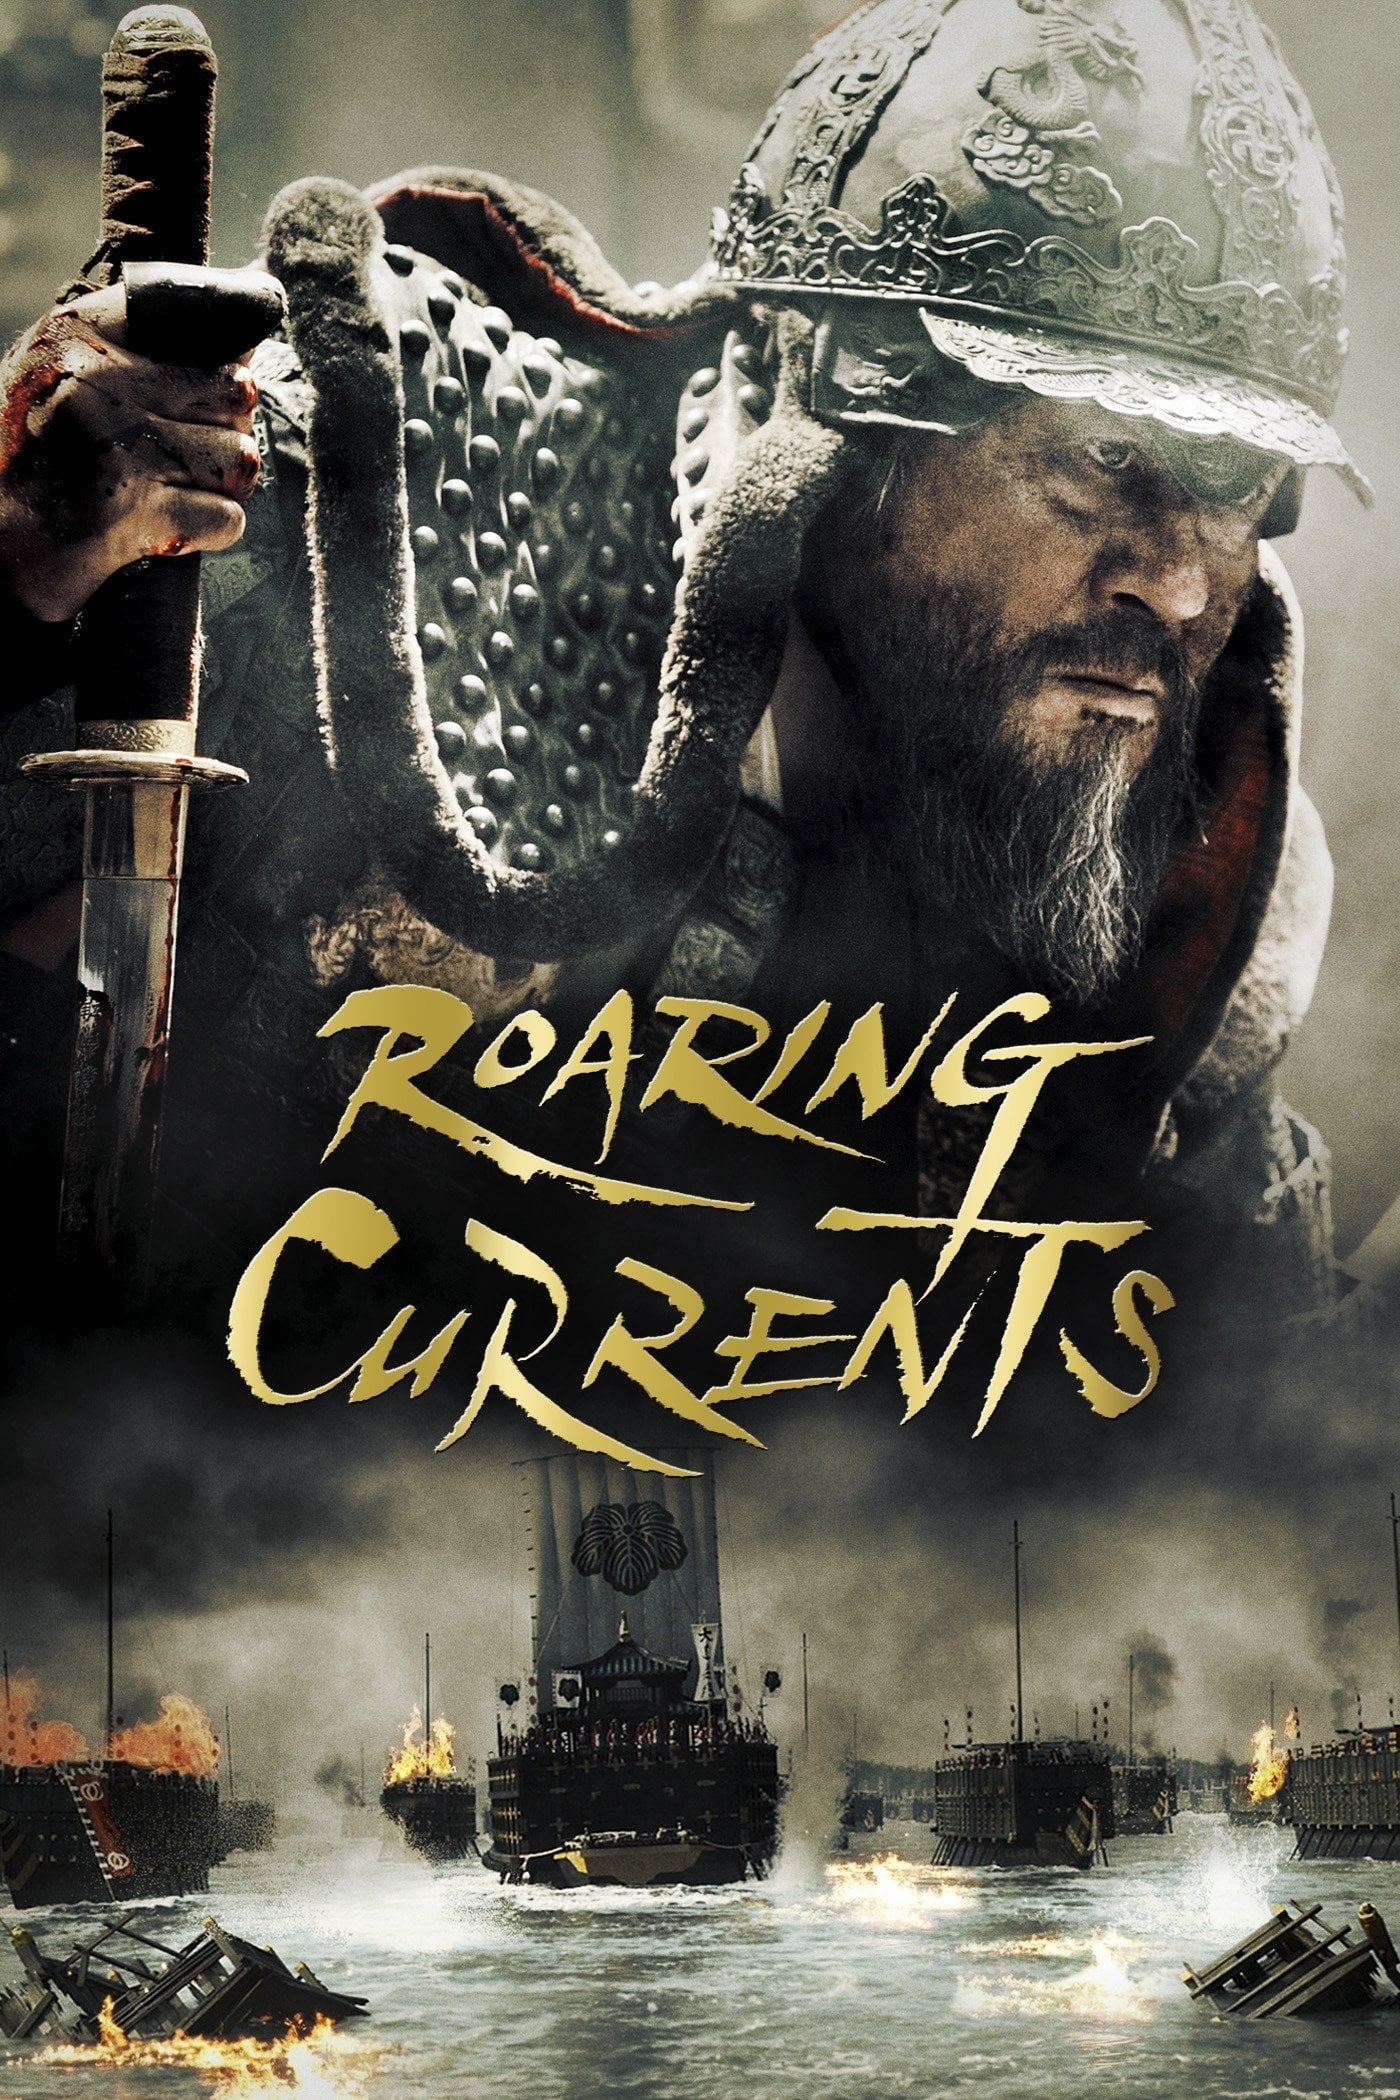 movie the admiral roaring currents